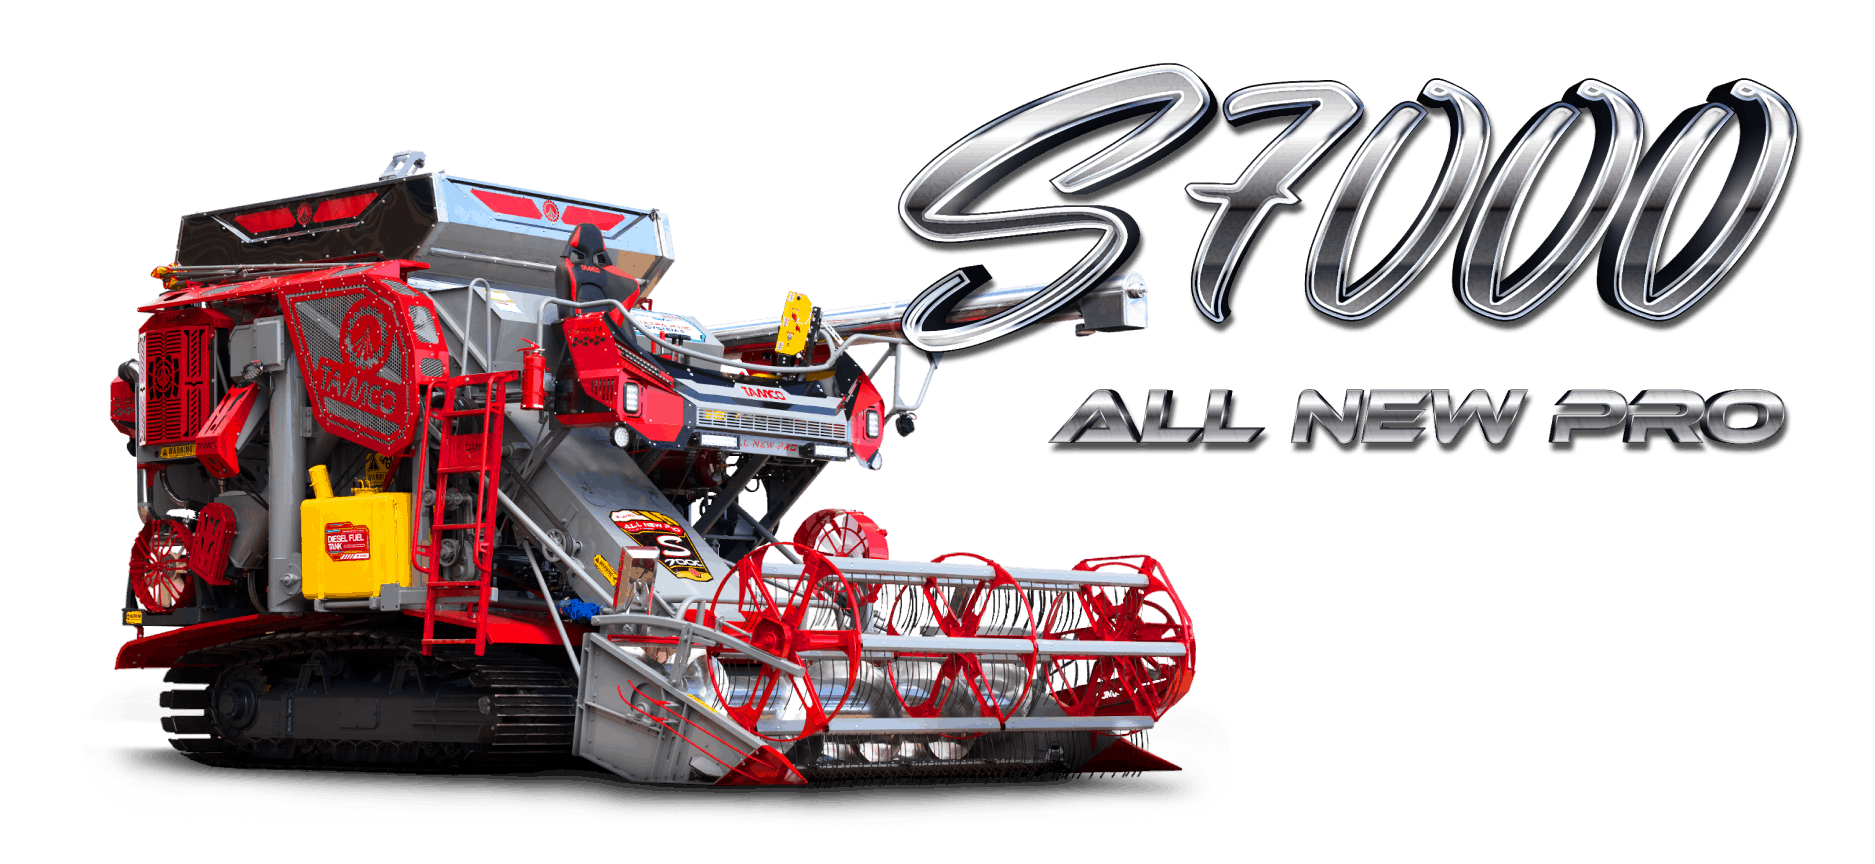 S7000-all-new-pro